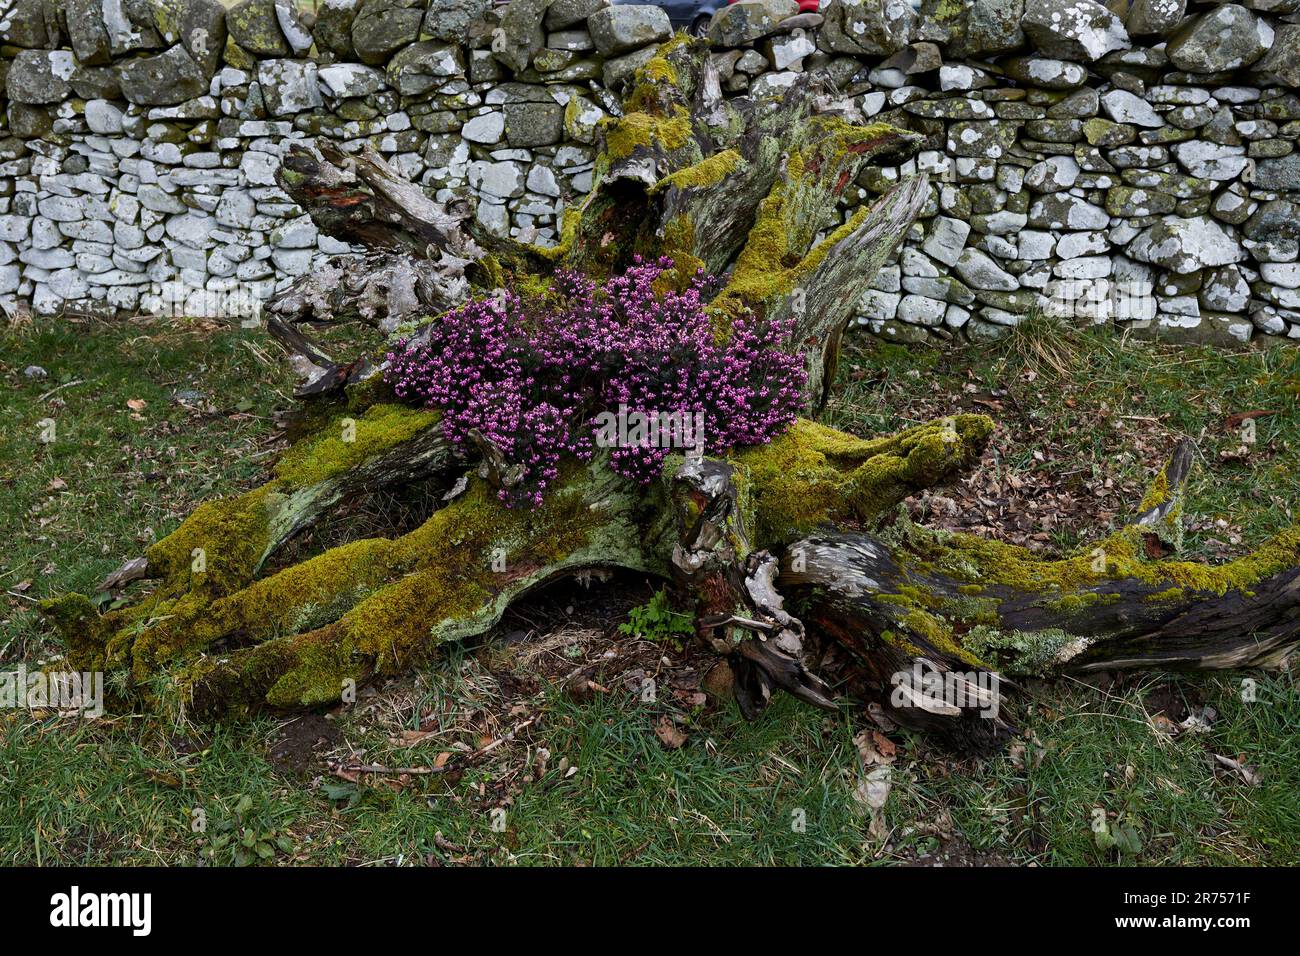 Heather growing on an old rotting tree stump outside Tibbie Shiel's Inn by St Mary's Loch. Scotland Stock Photo